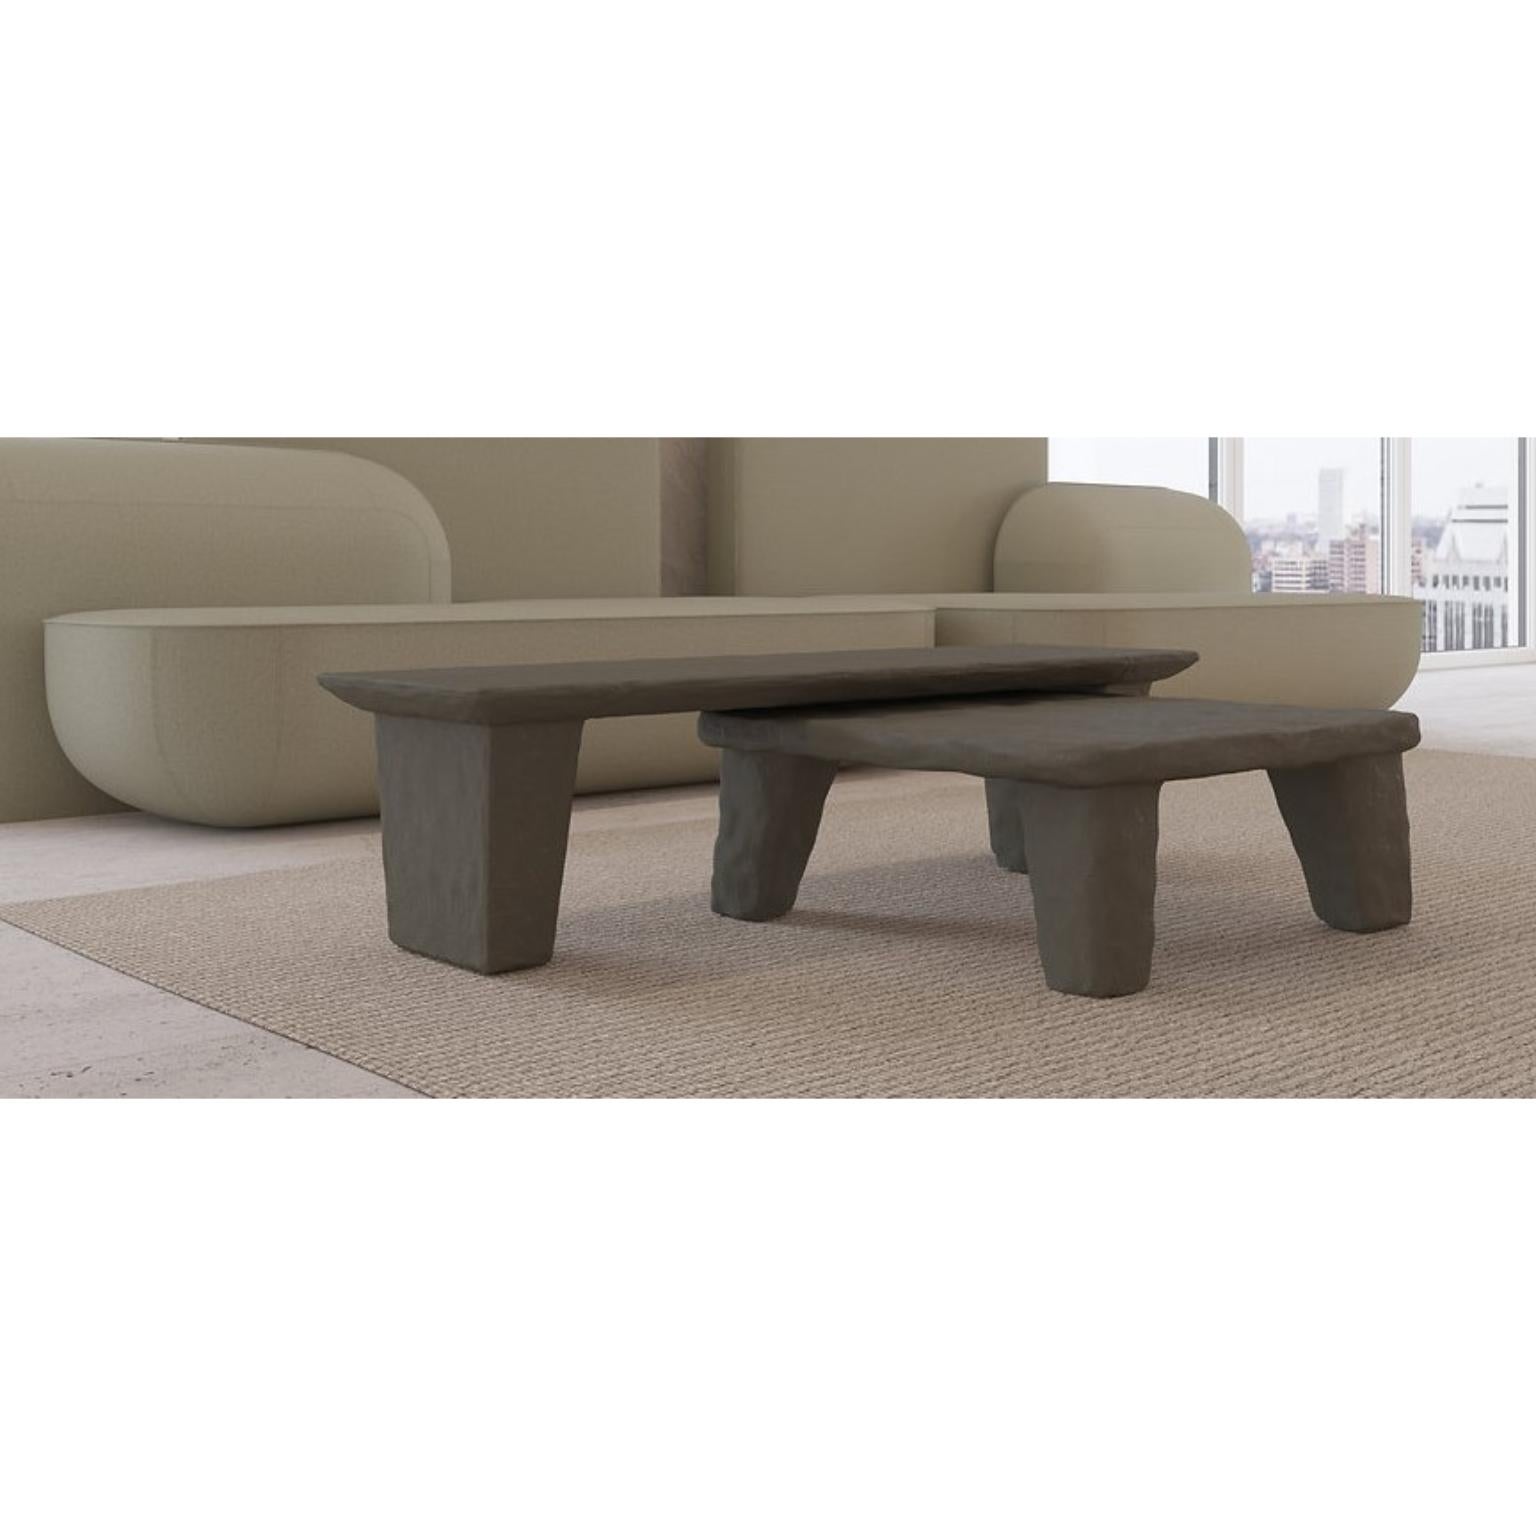 Set of 2 Ztista low tables by Faina
Design: Victoriya Yakusha
Materials: steel frame, a blend of cellulose, clay, flax fiber, wood chips, biopolymer cover
Dimensions: 
D 80 x W 160 x H 30 cm
62 x 25 cm
Available in 12 colors. 

Almost carved in